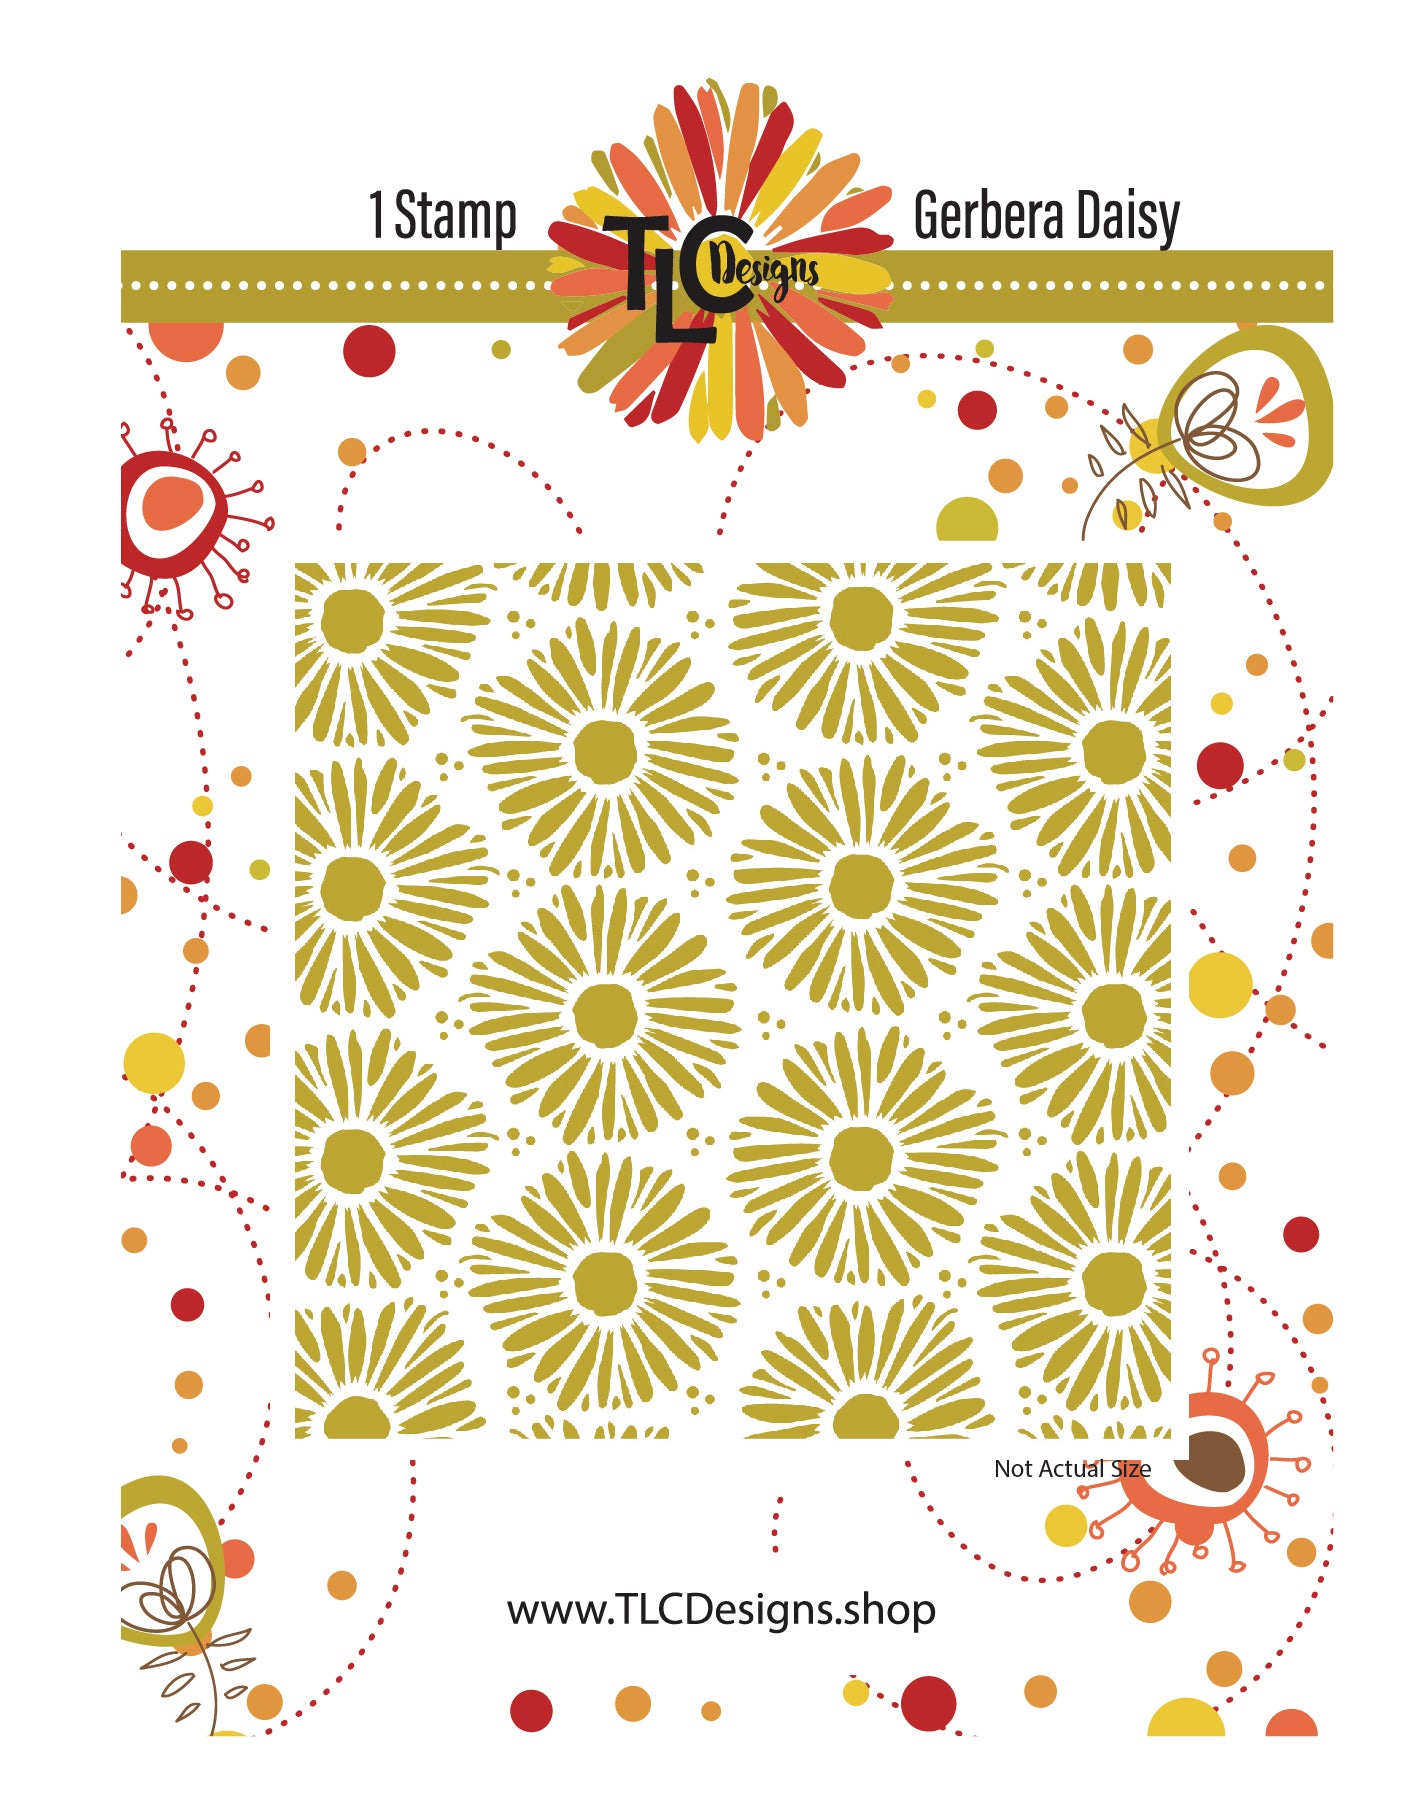 Gerbera Daisy Background Stamps